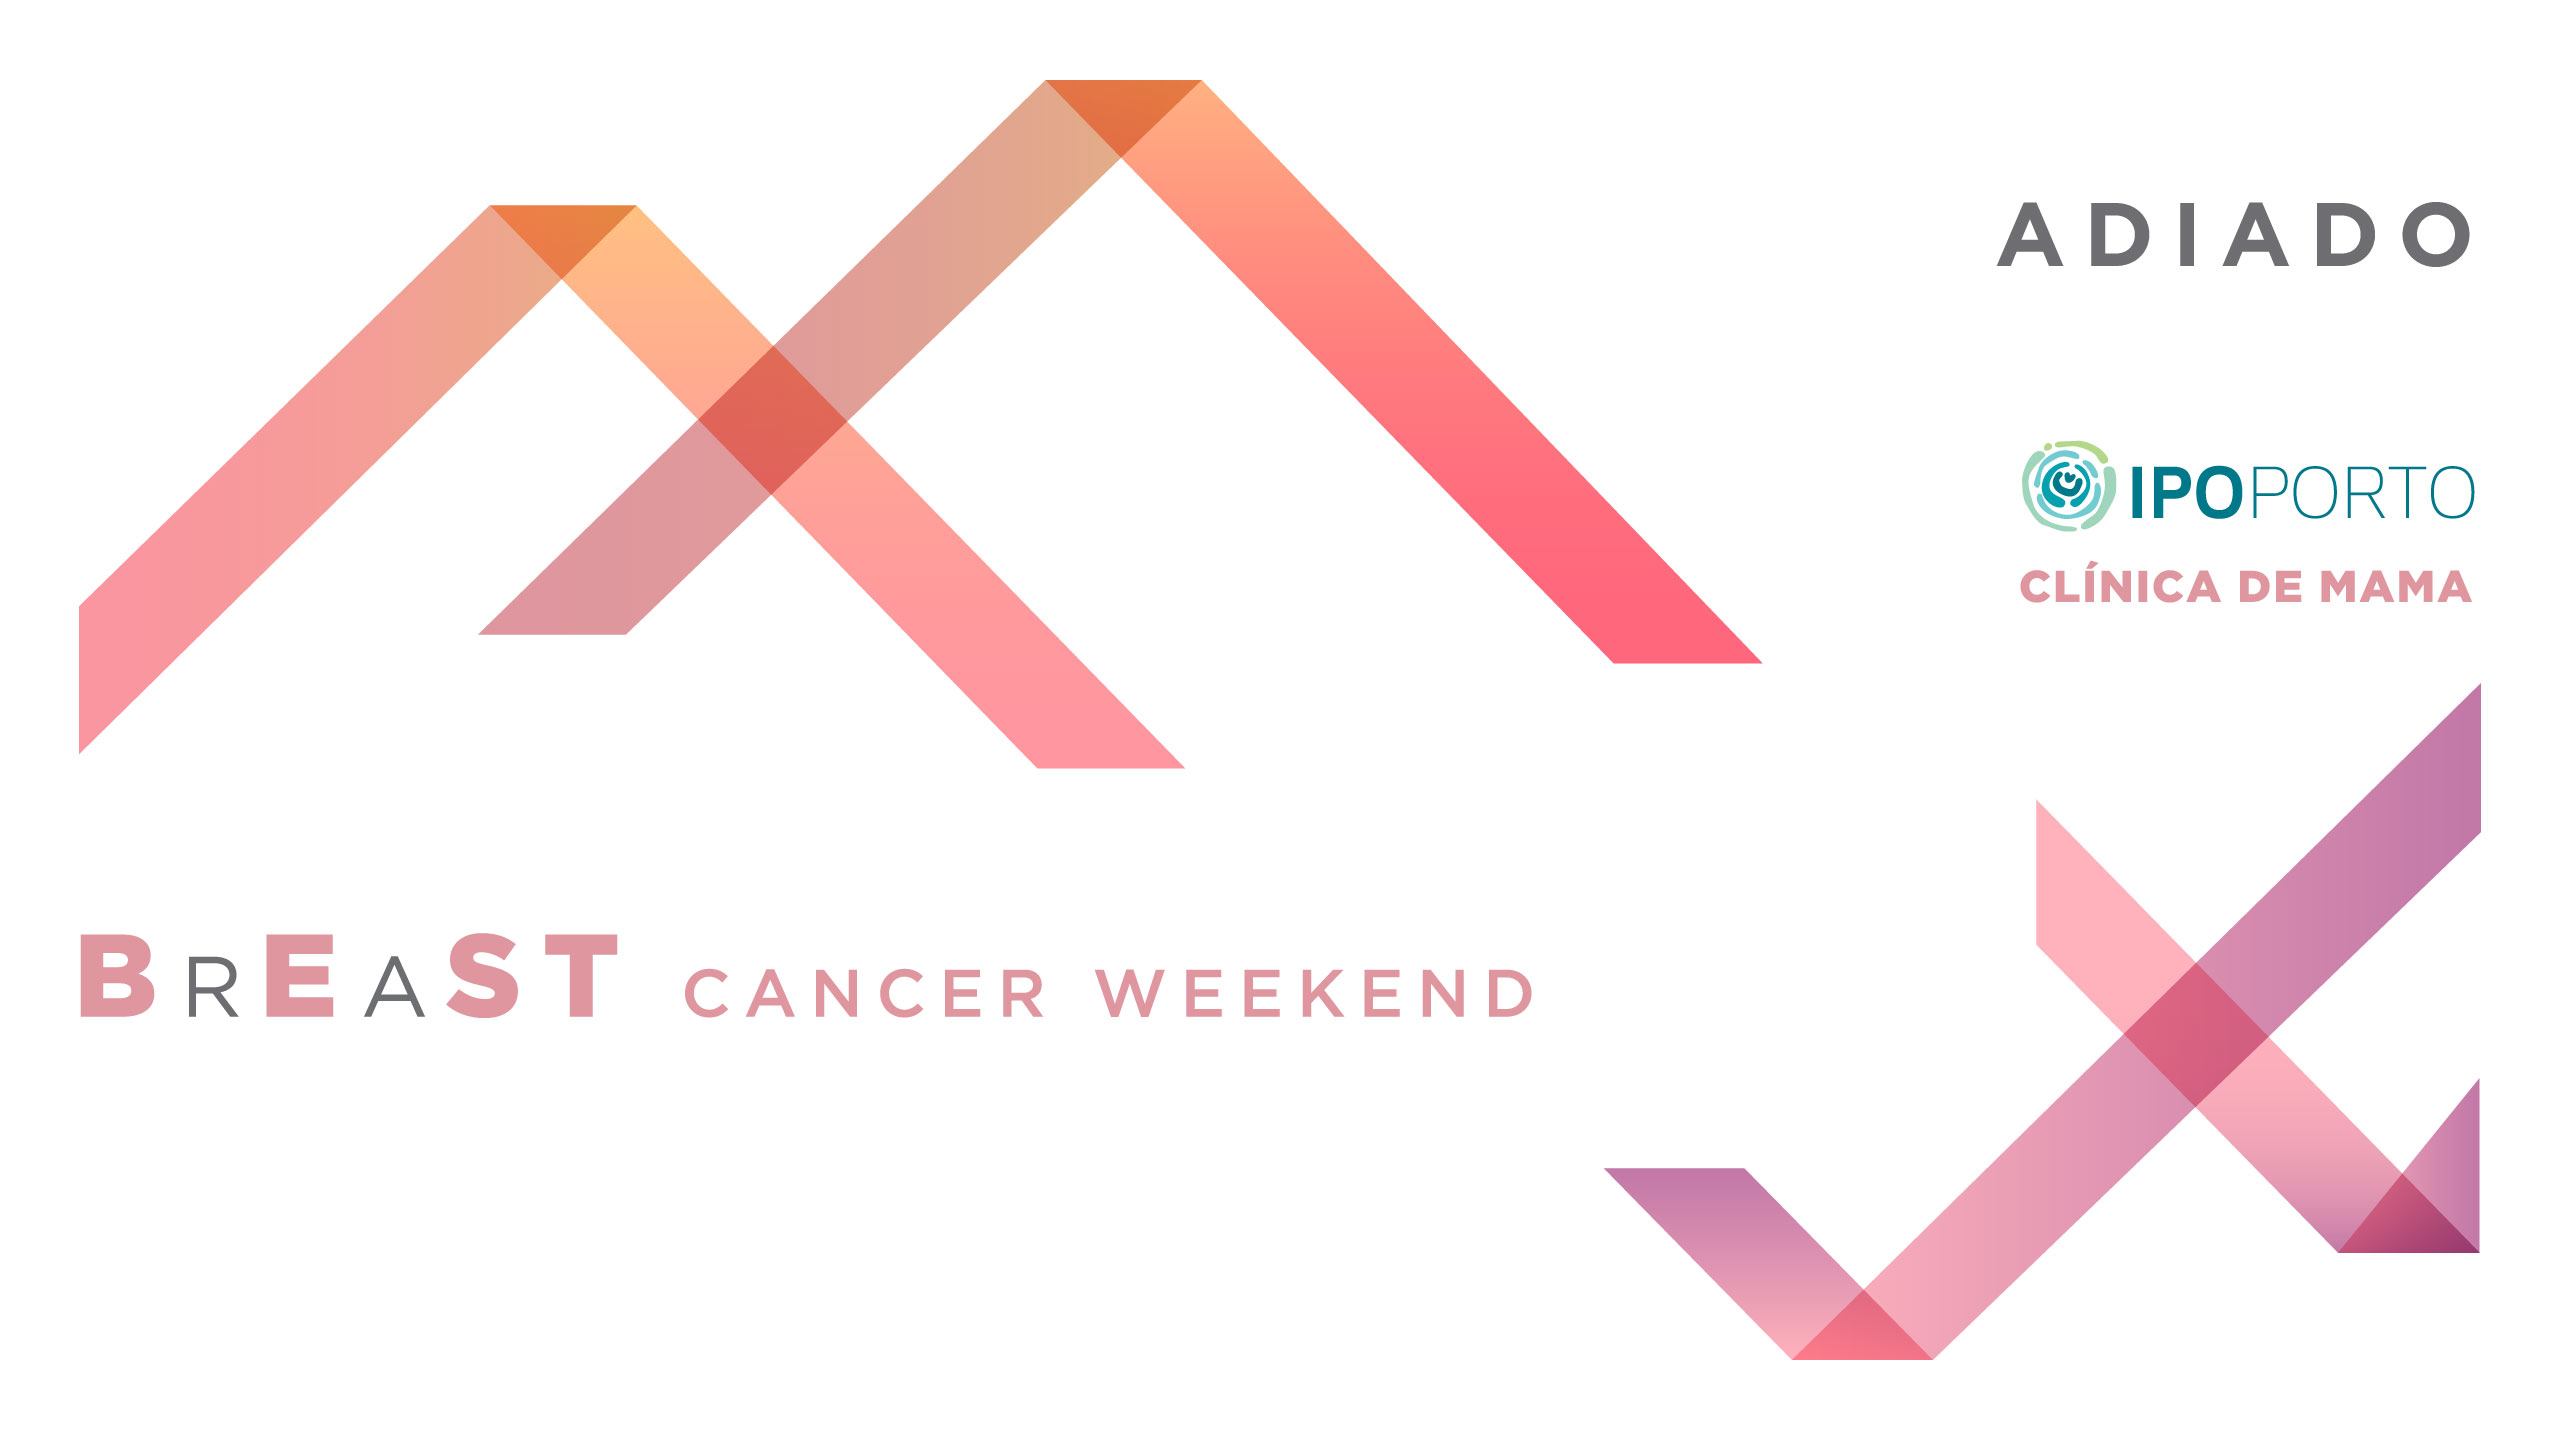 5th BrEaST Cancer Weekend